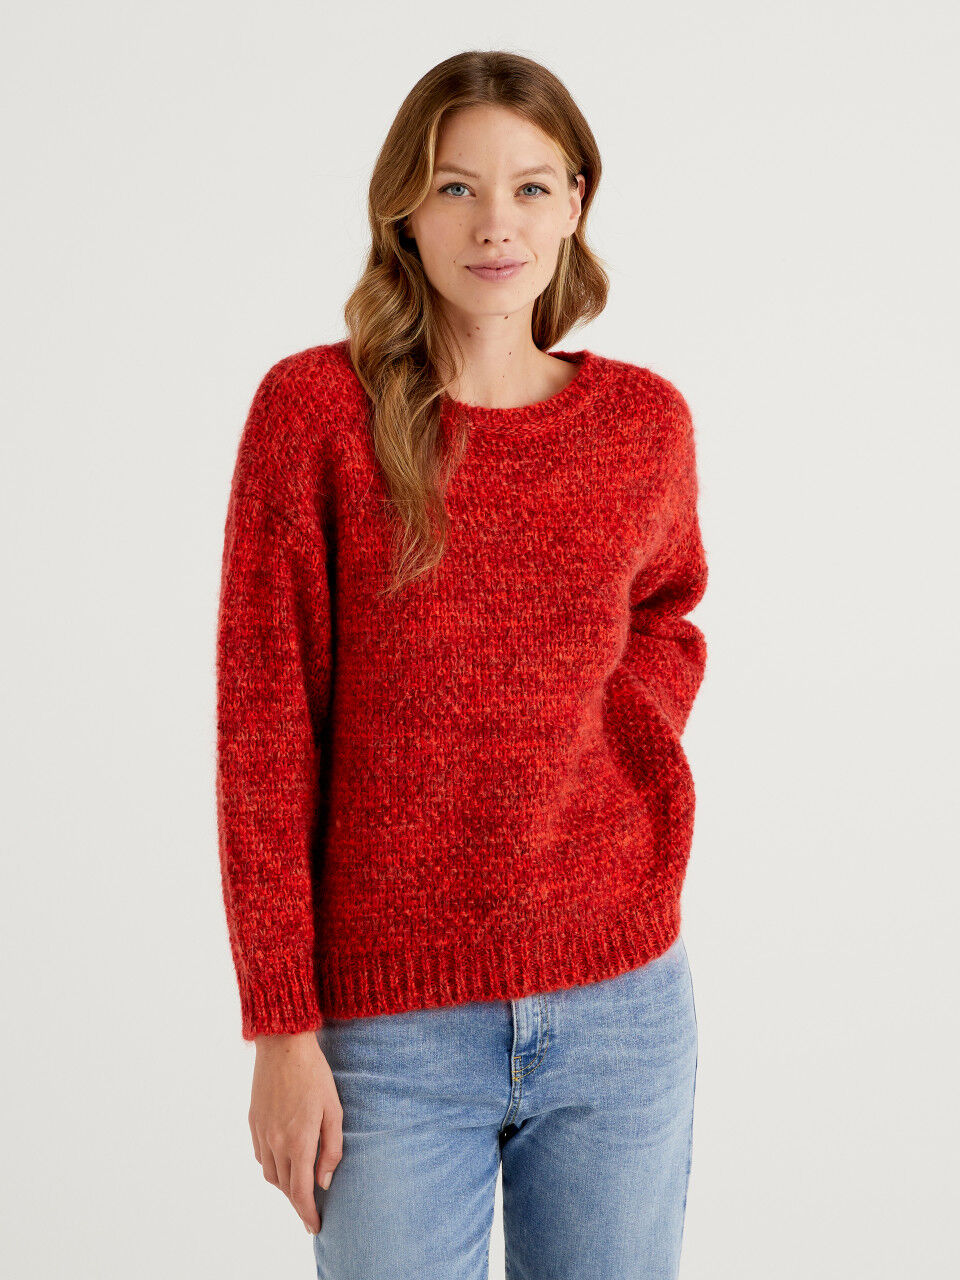 WOMEN FASHION Jumpers & Sweatshirts Casual NoName jumper Red M discount 68% 